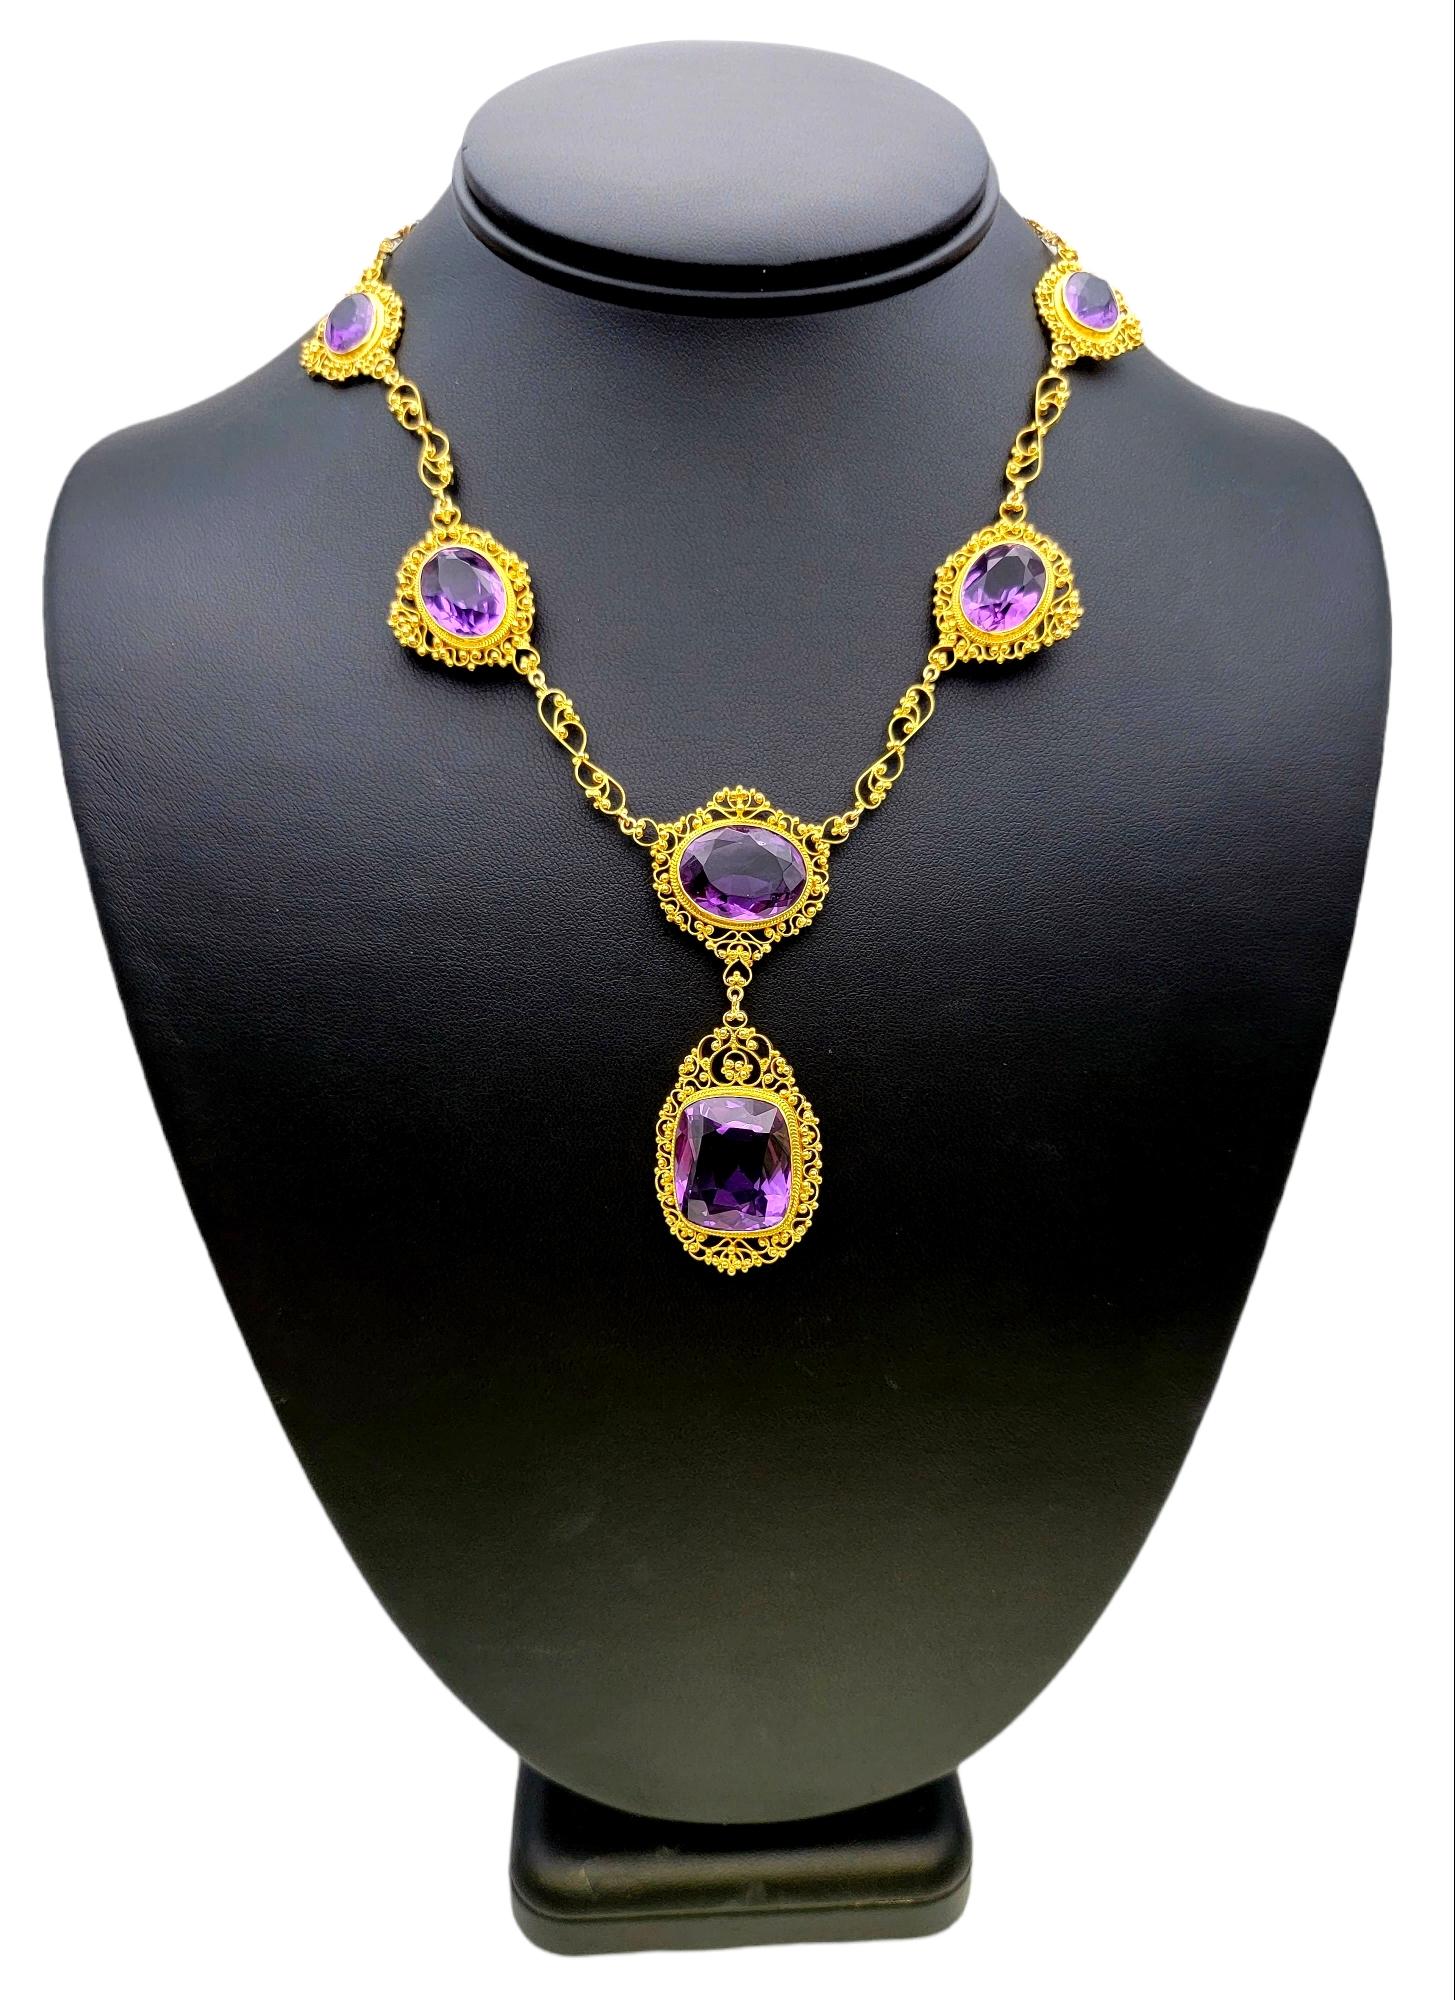 48.48 Carat Cushion and Oval Cut Amethyst Station Drop Necklace in 21 Karat Gold 2